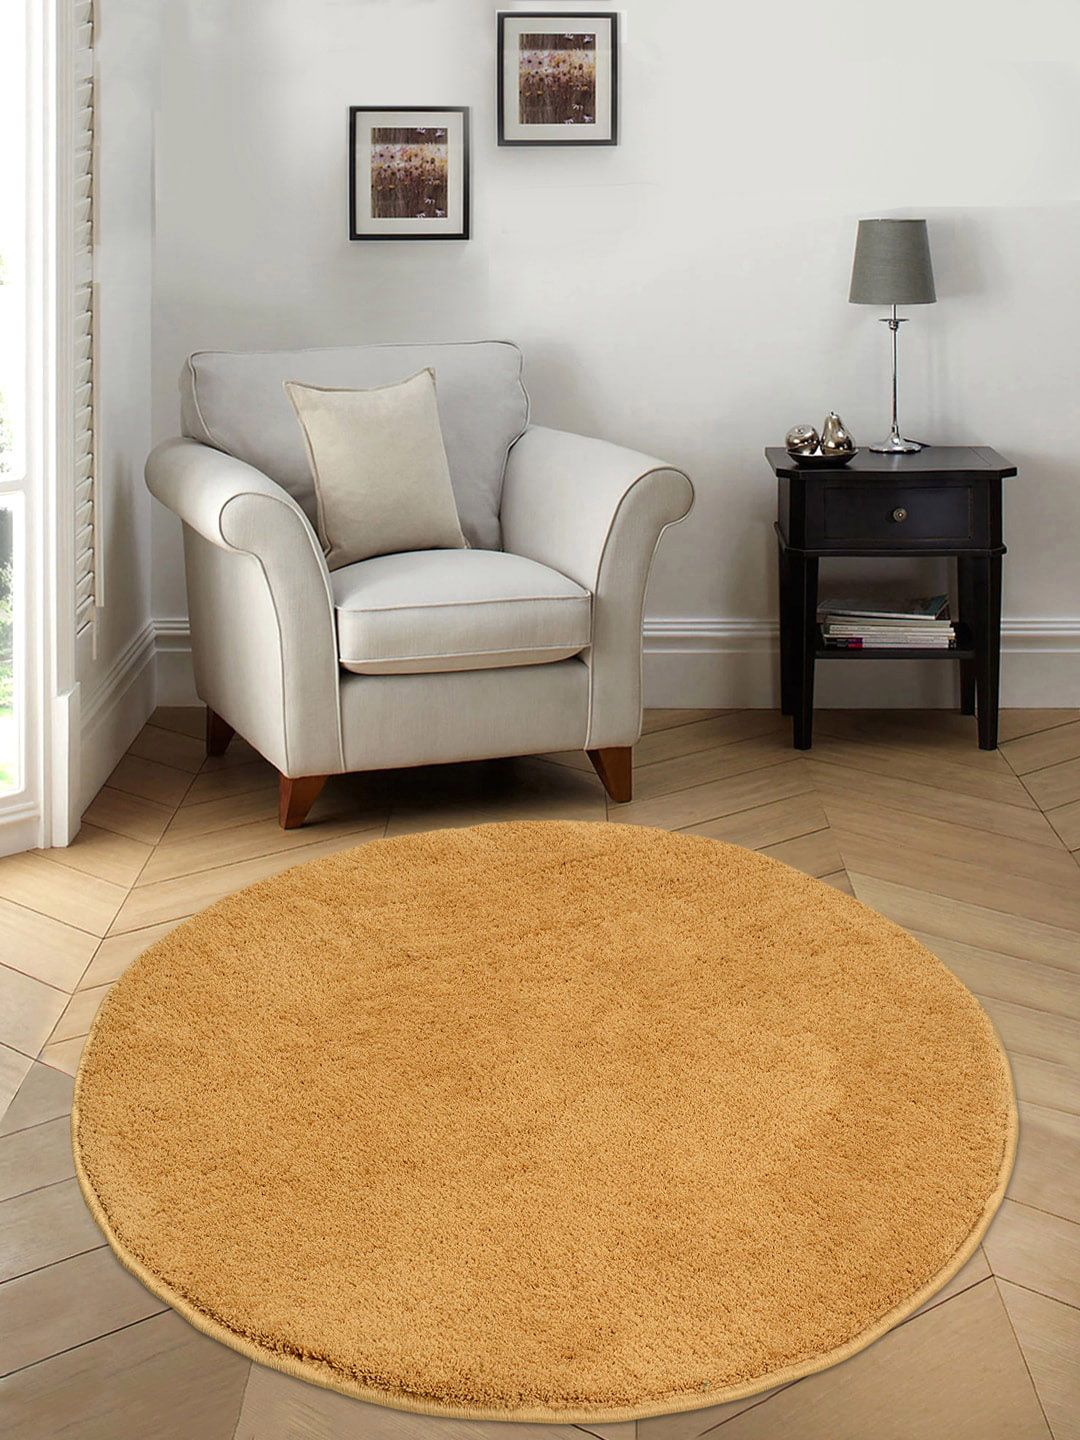 Saral Home Gold-Coloured Solid Round Floor Mats & Dhurries Price in India